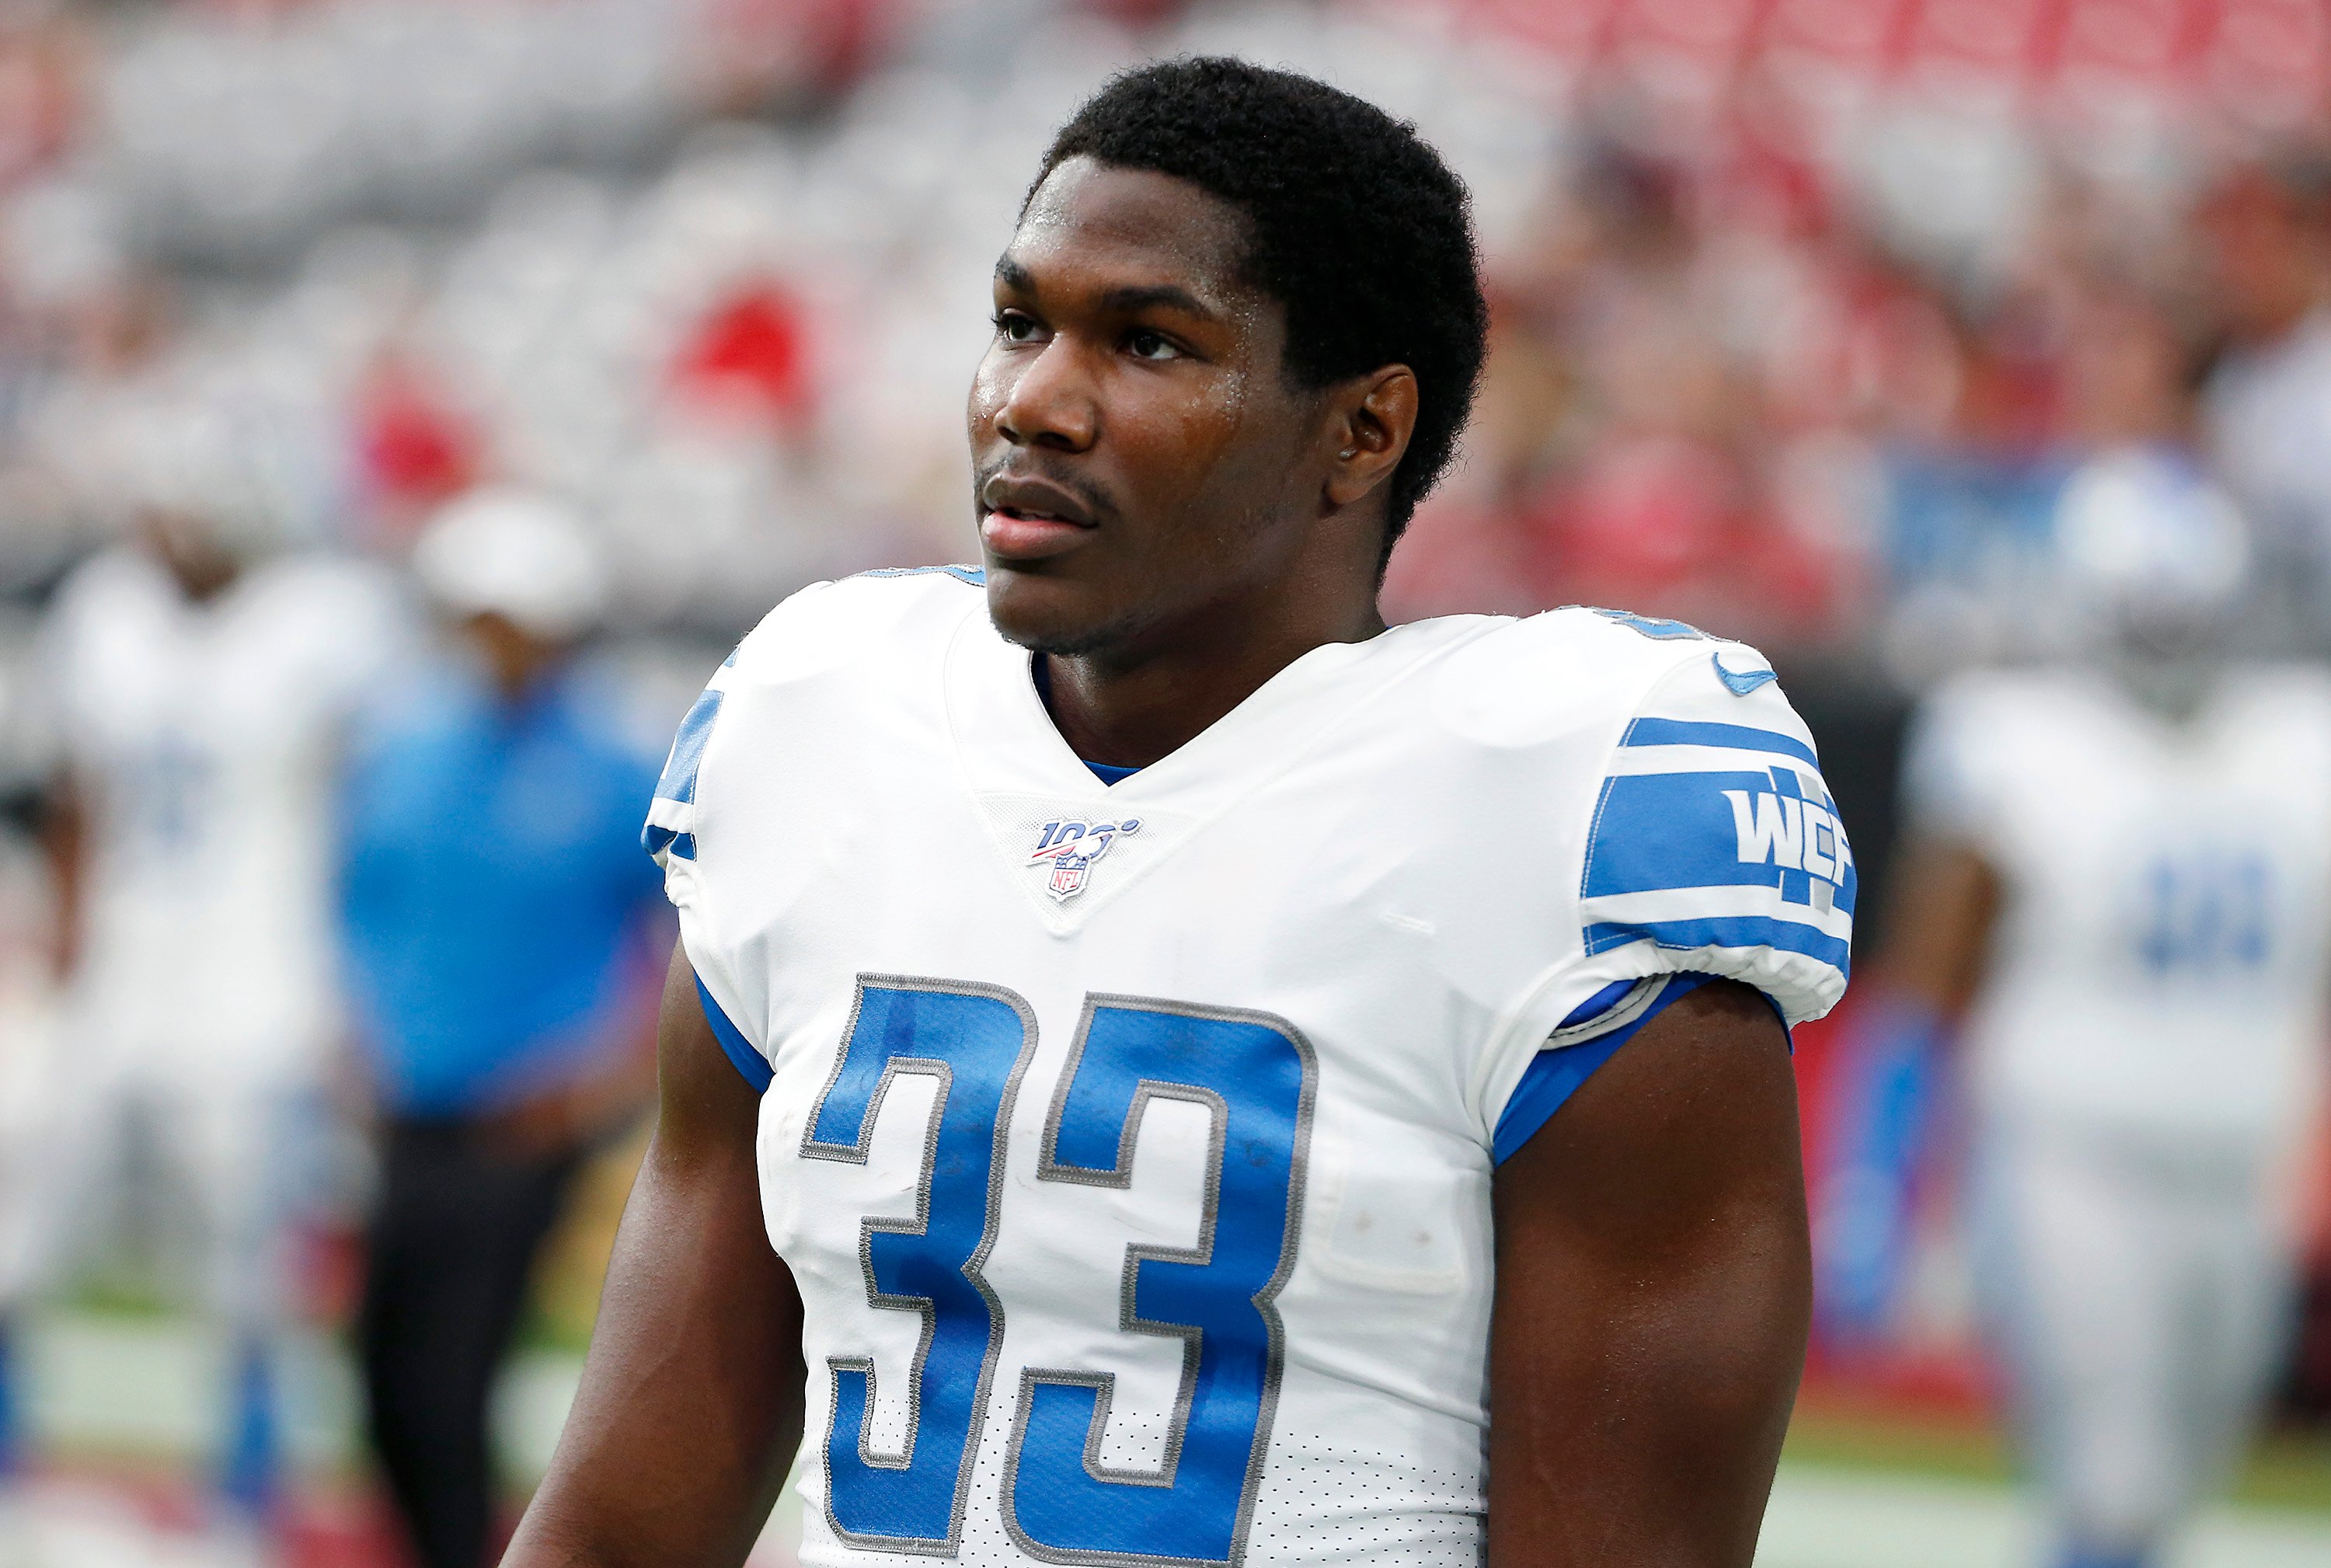 Running back Kerryon Johnson number 33 of the Detroit Lions